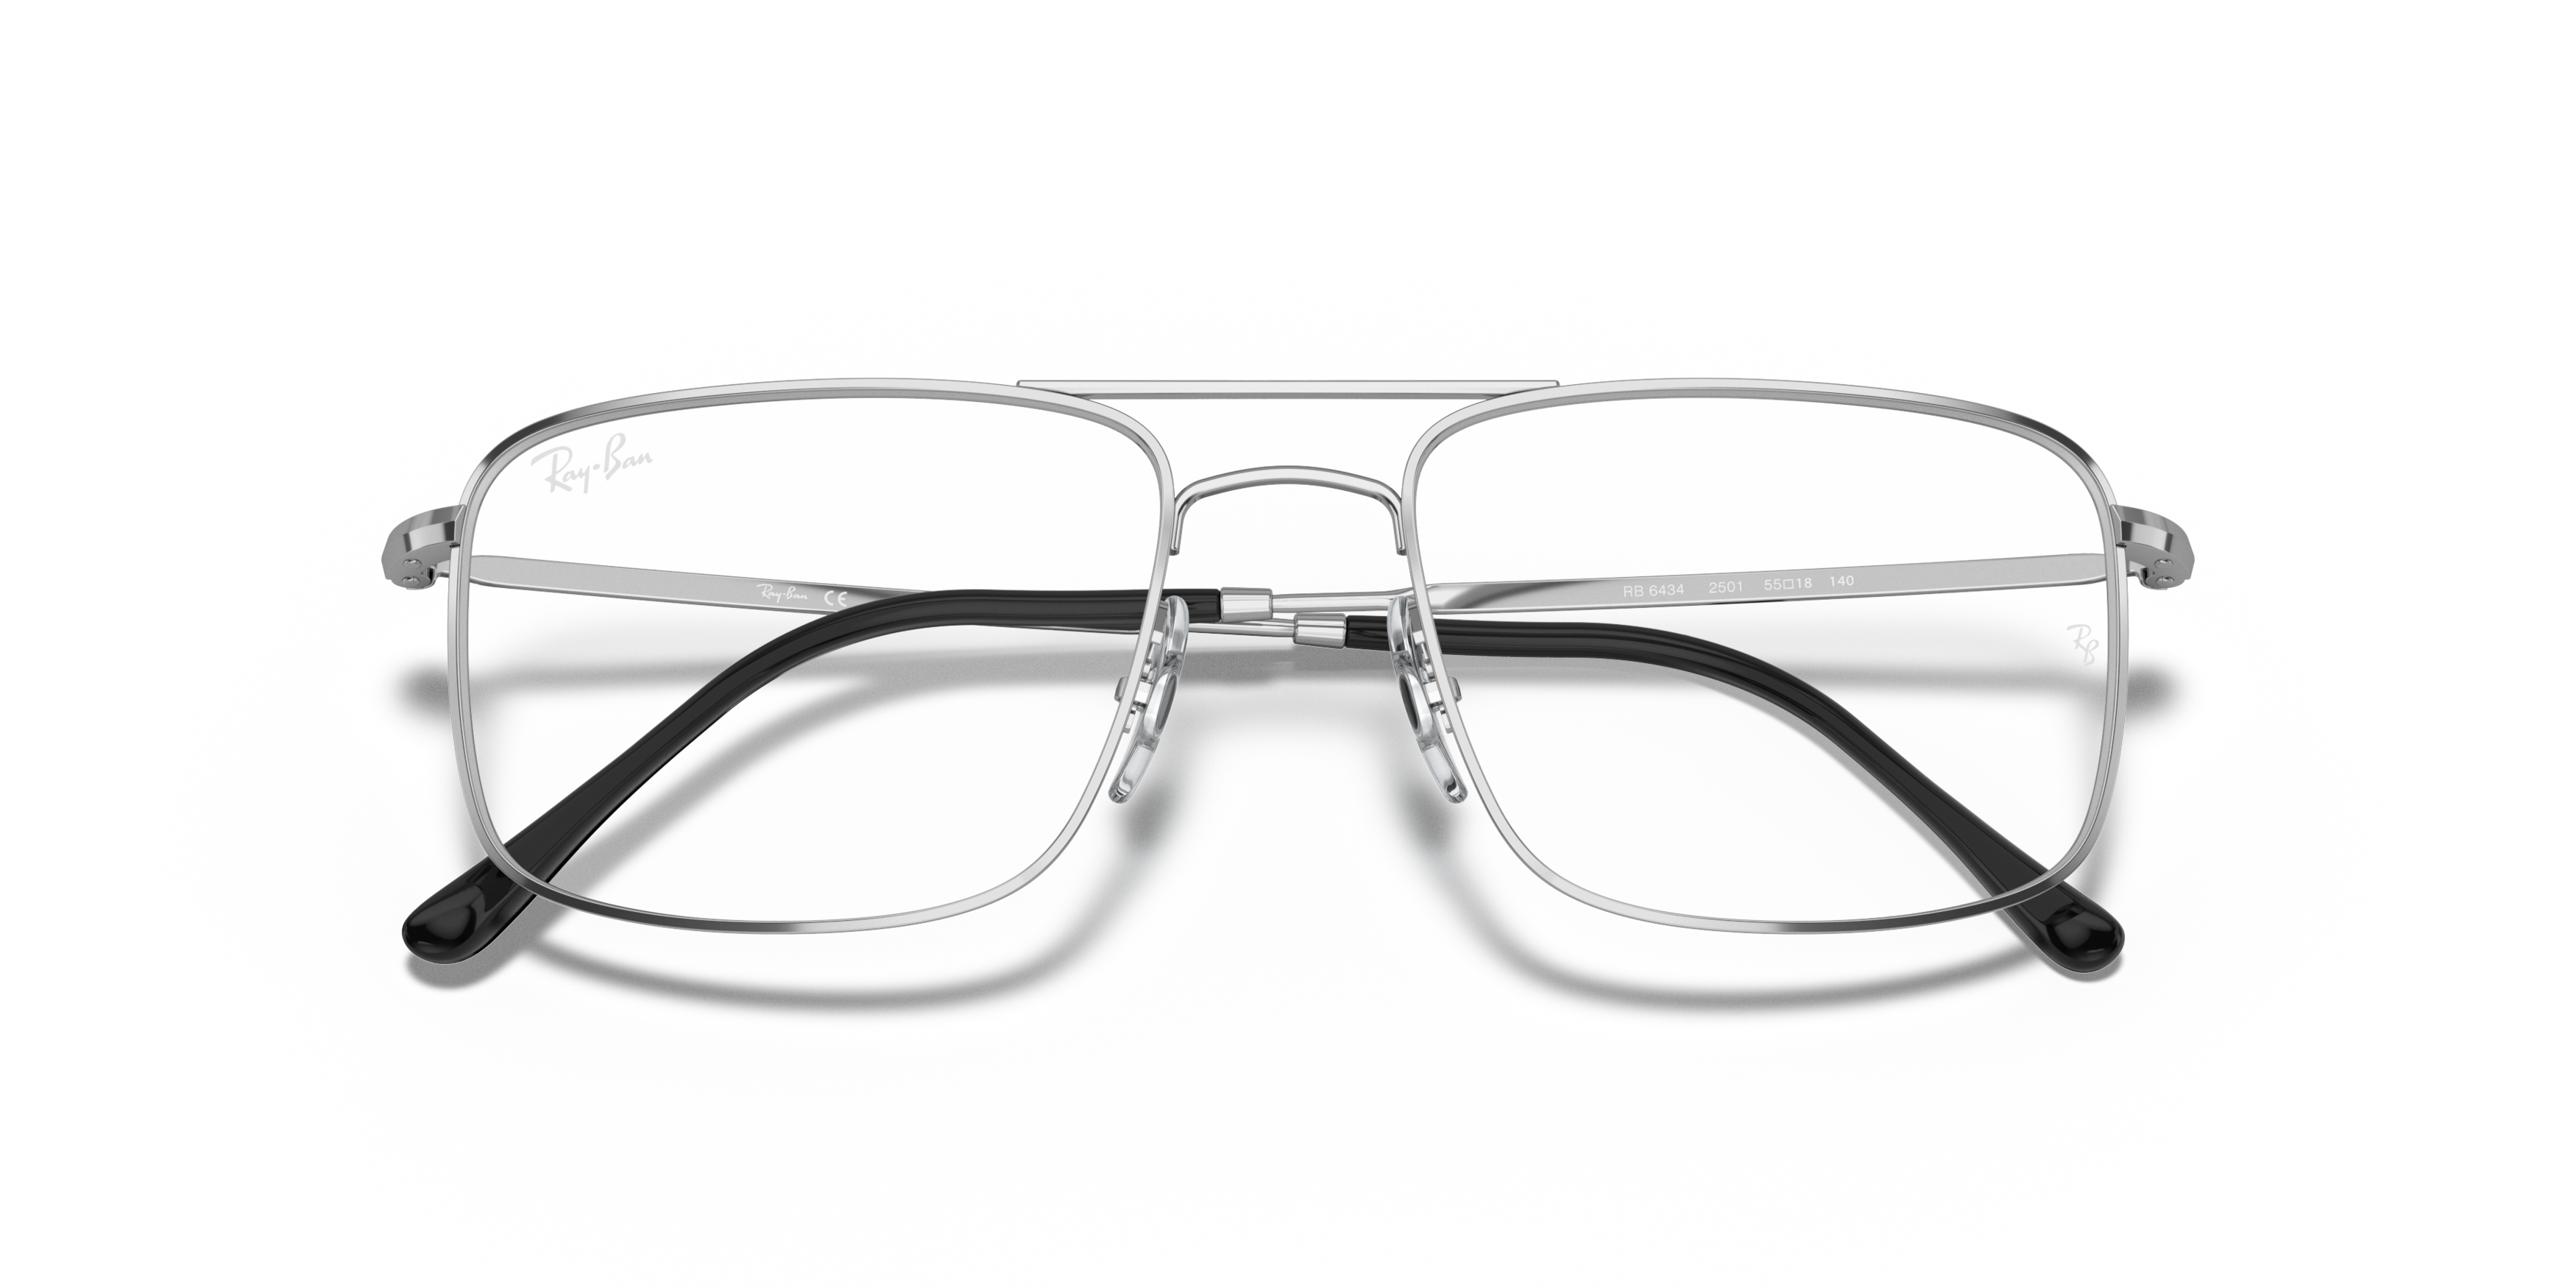 Folded Ray-Ban RX 6434 (2501) Glasses Transparent / Silver